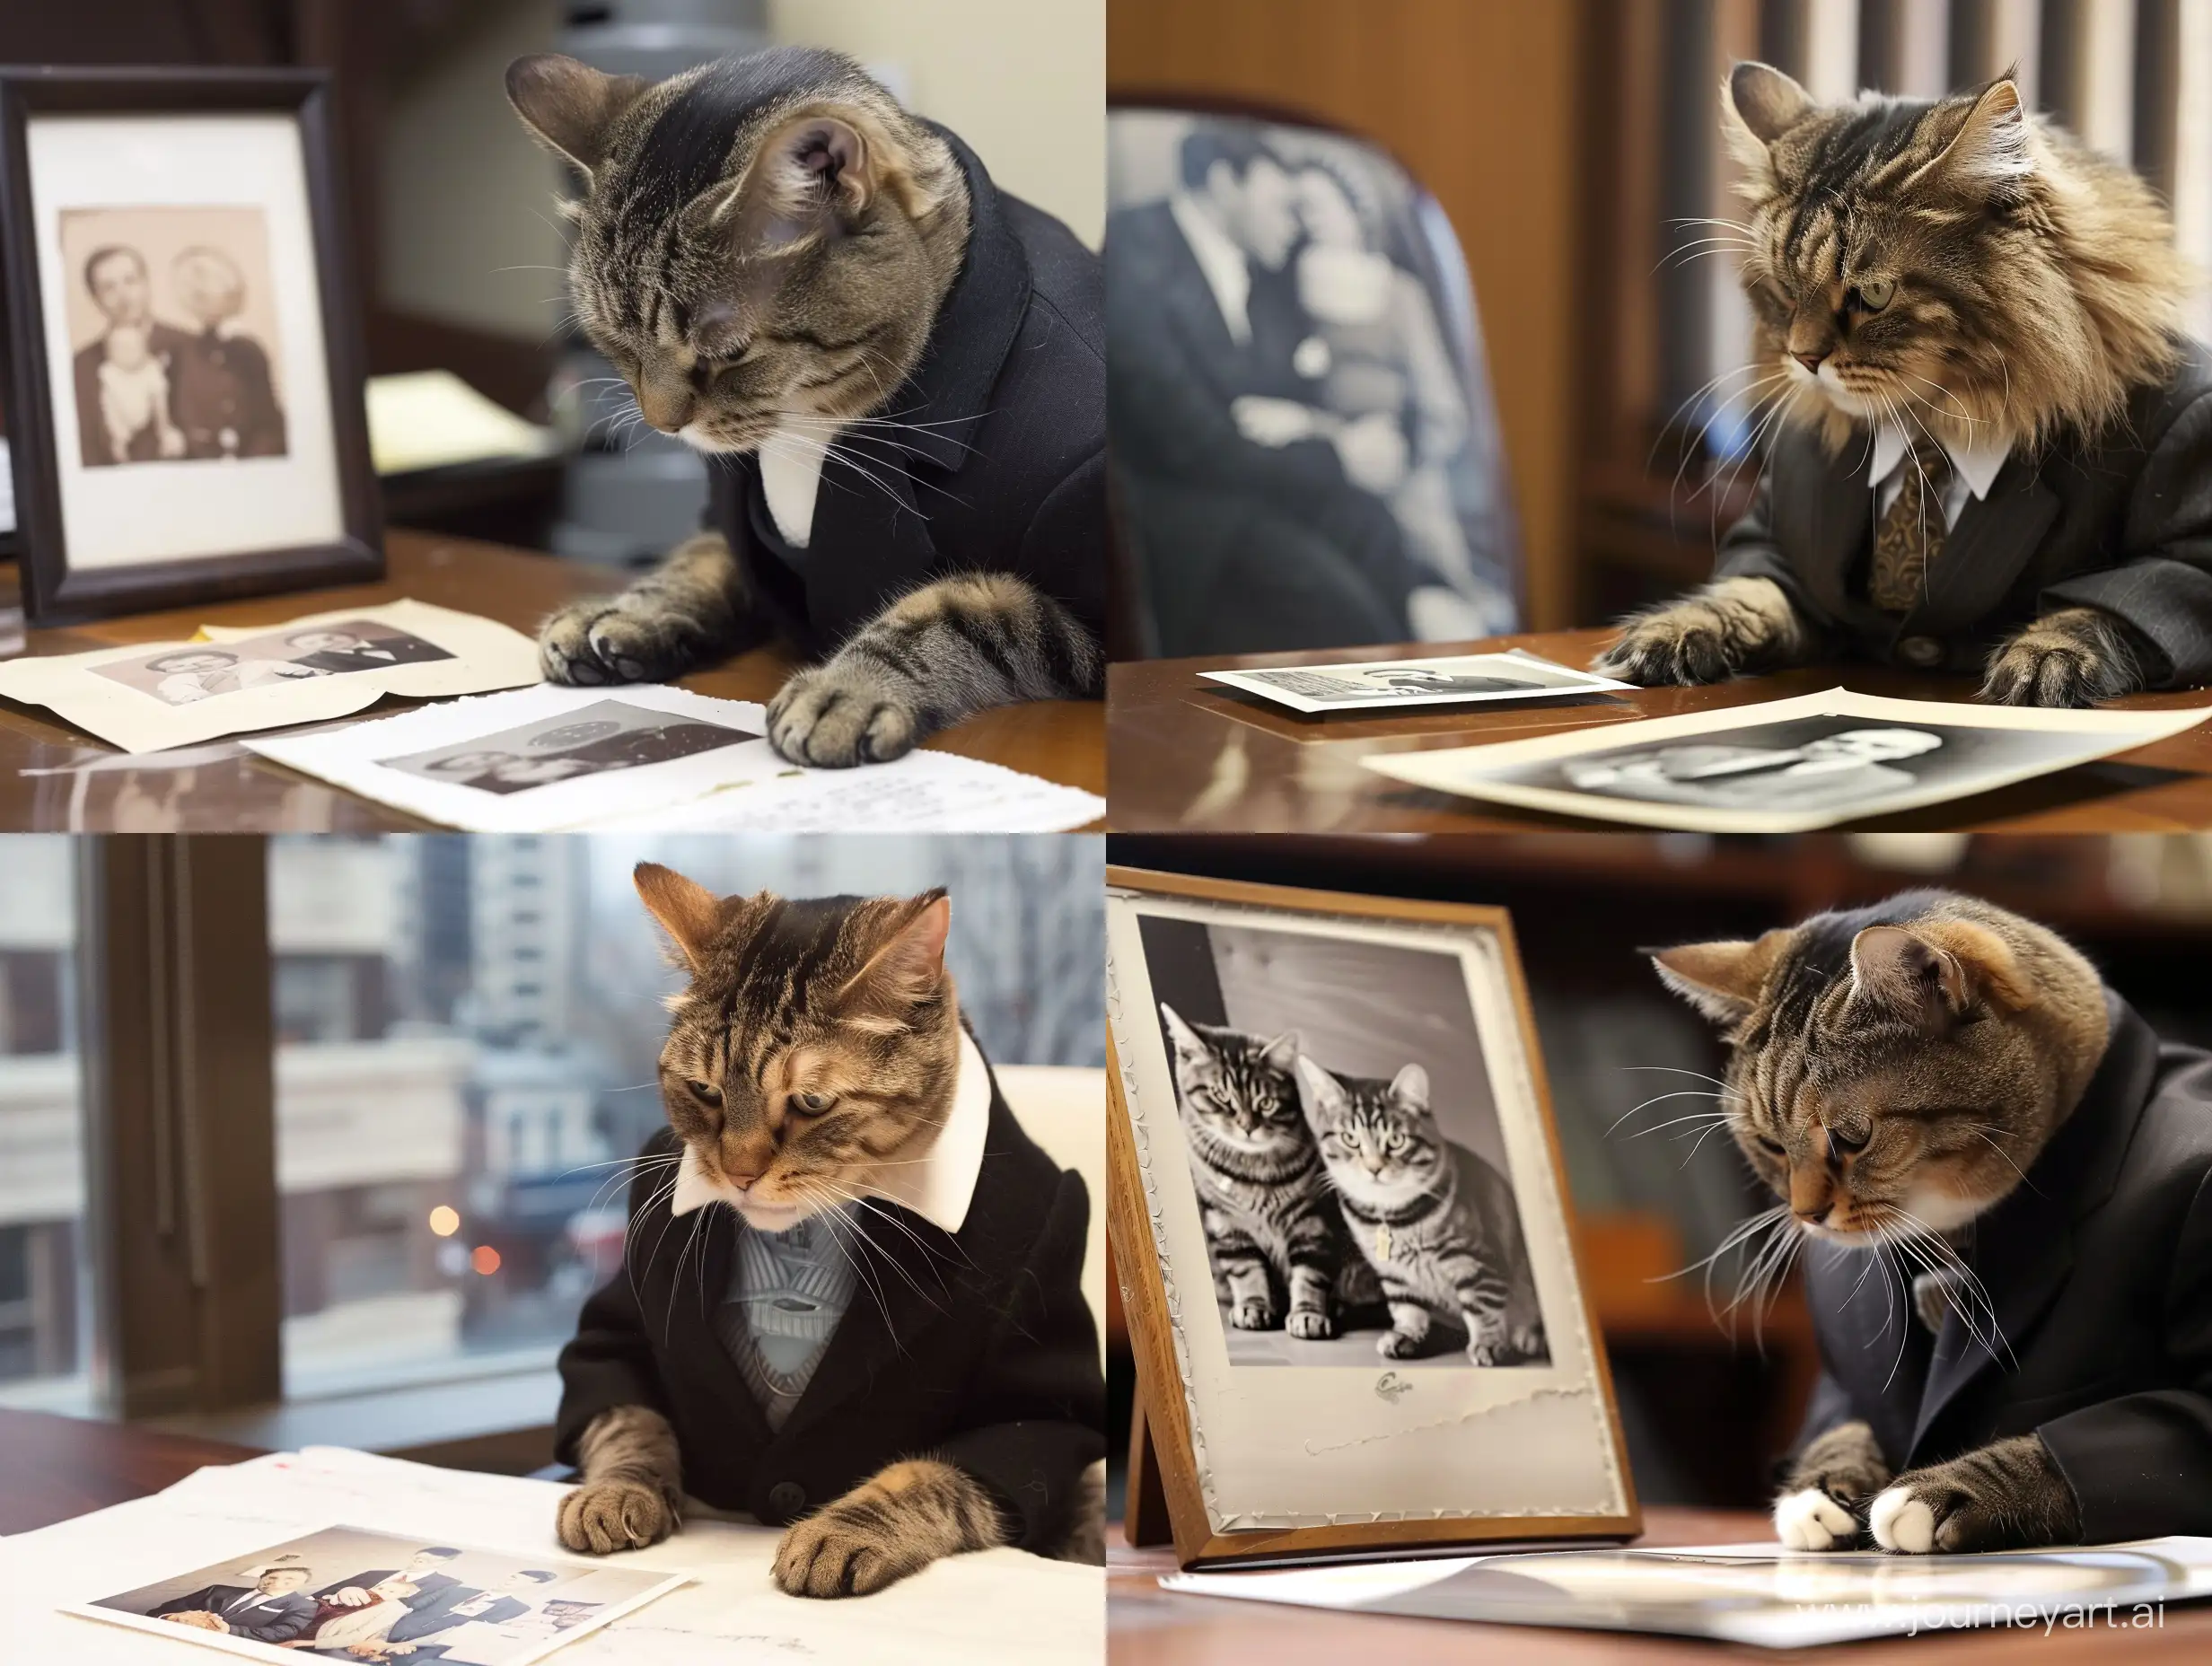 the cat is sitting in the office in a suit, but is sad and looks at the photograph on the table. this photo shows his cat family